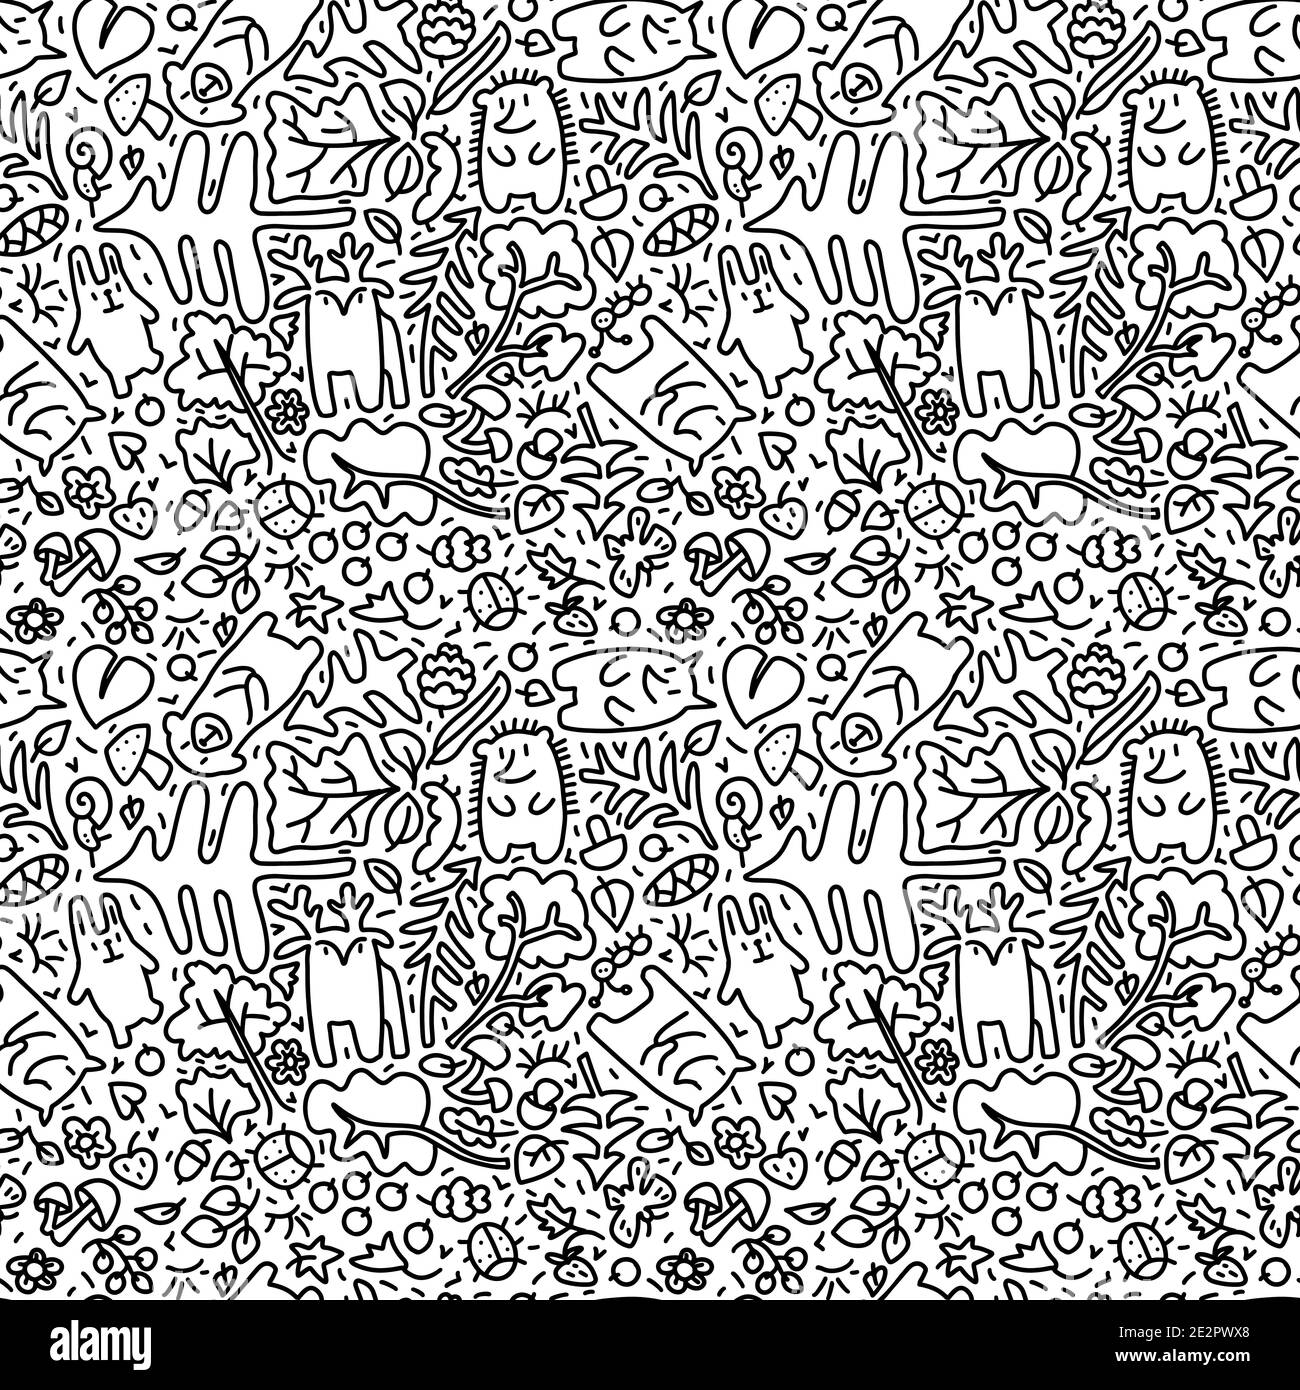 Doodle Forest seamless pattern with animals and plants. Textile prints, wrapping, wallpapers backgrounds hand drawn sketch vector illustration Stock Vector